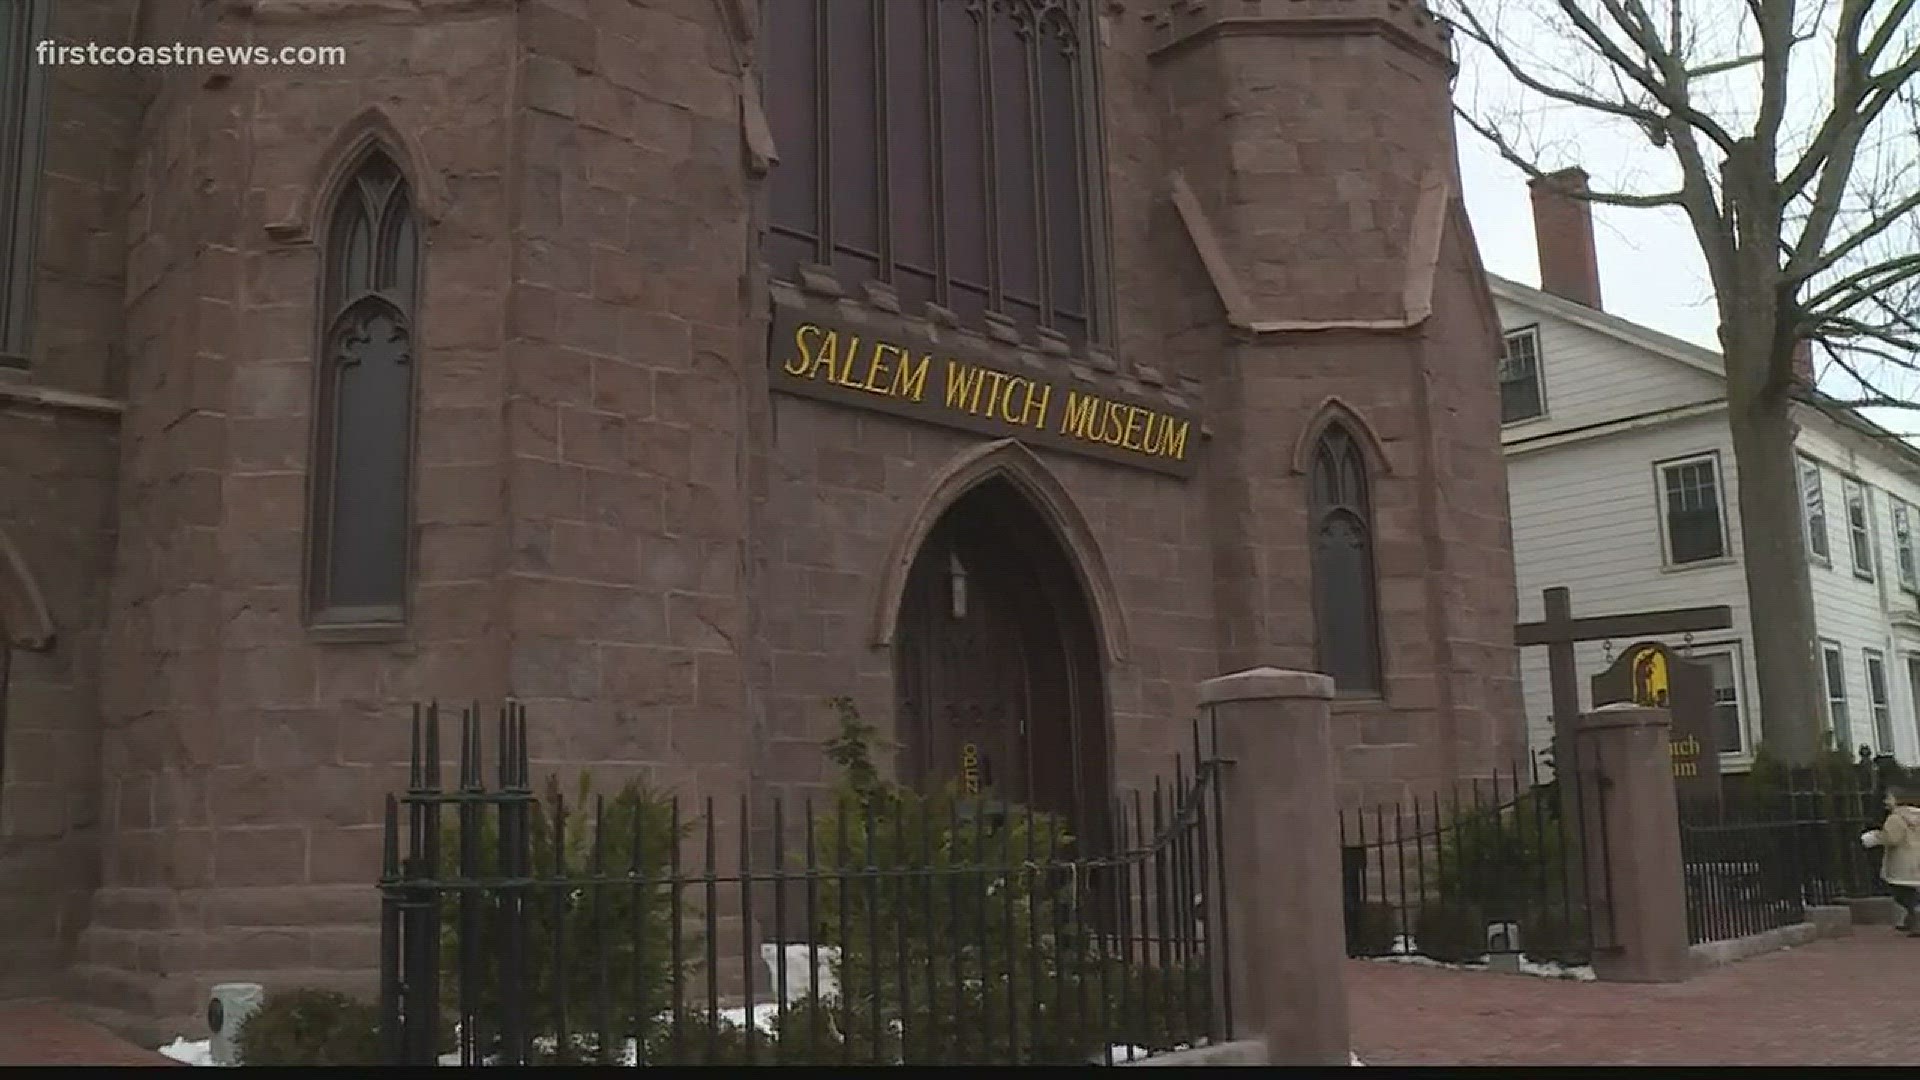 FCN's Lewis Turner goes on a tour of the Salem Witch Museum while reporting in New England.